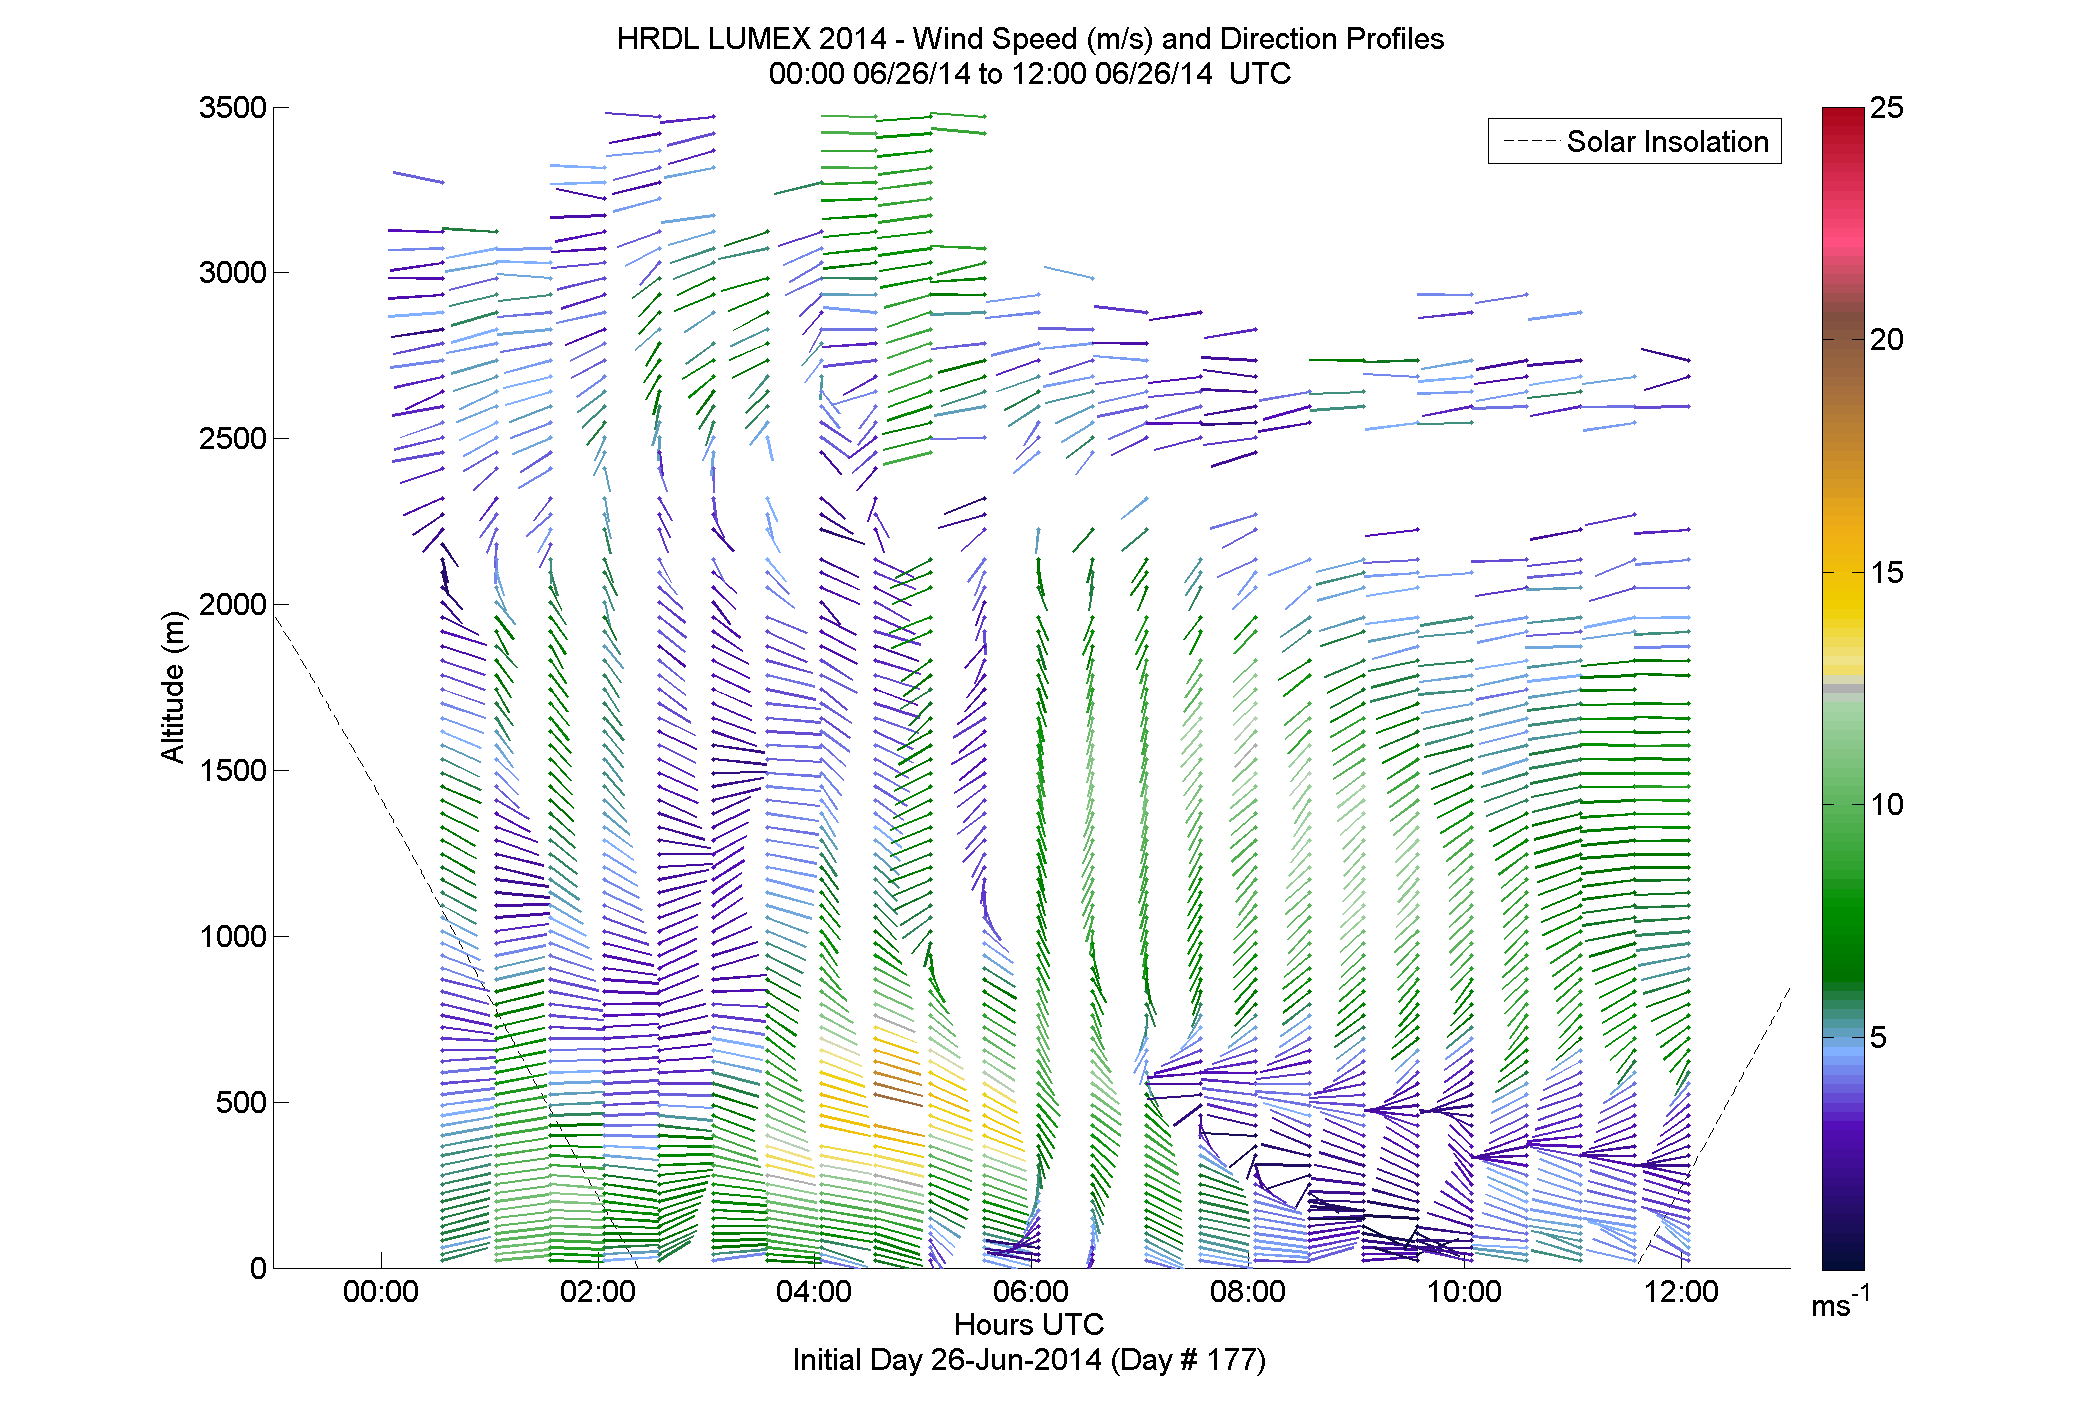 HRDL speed and direction profile - June 26 am